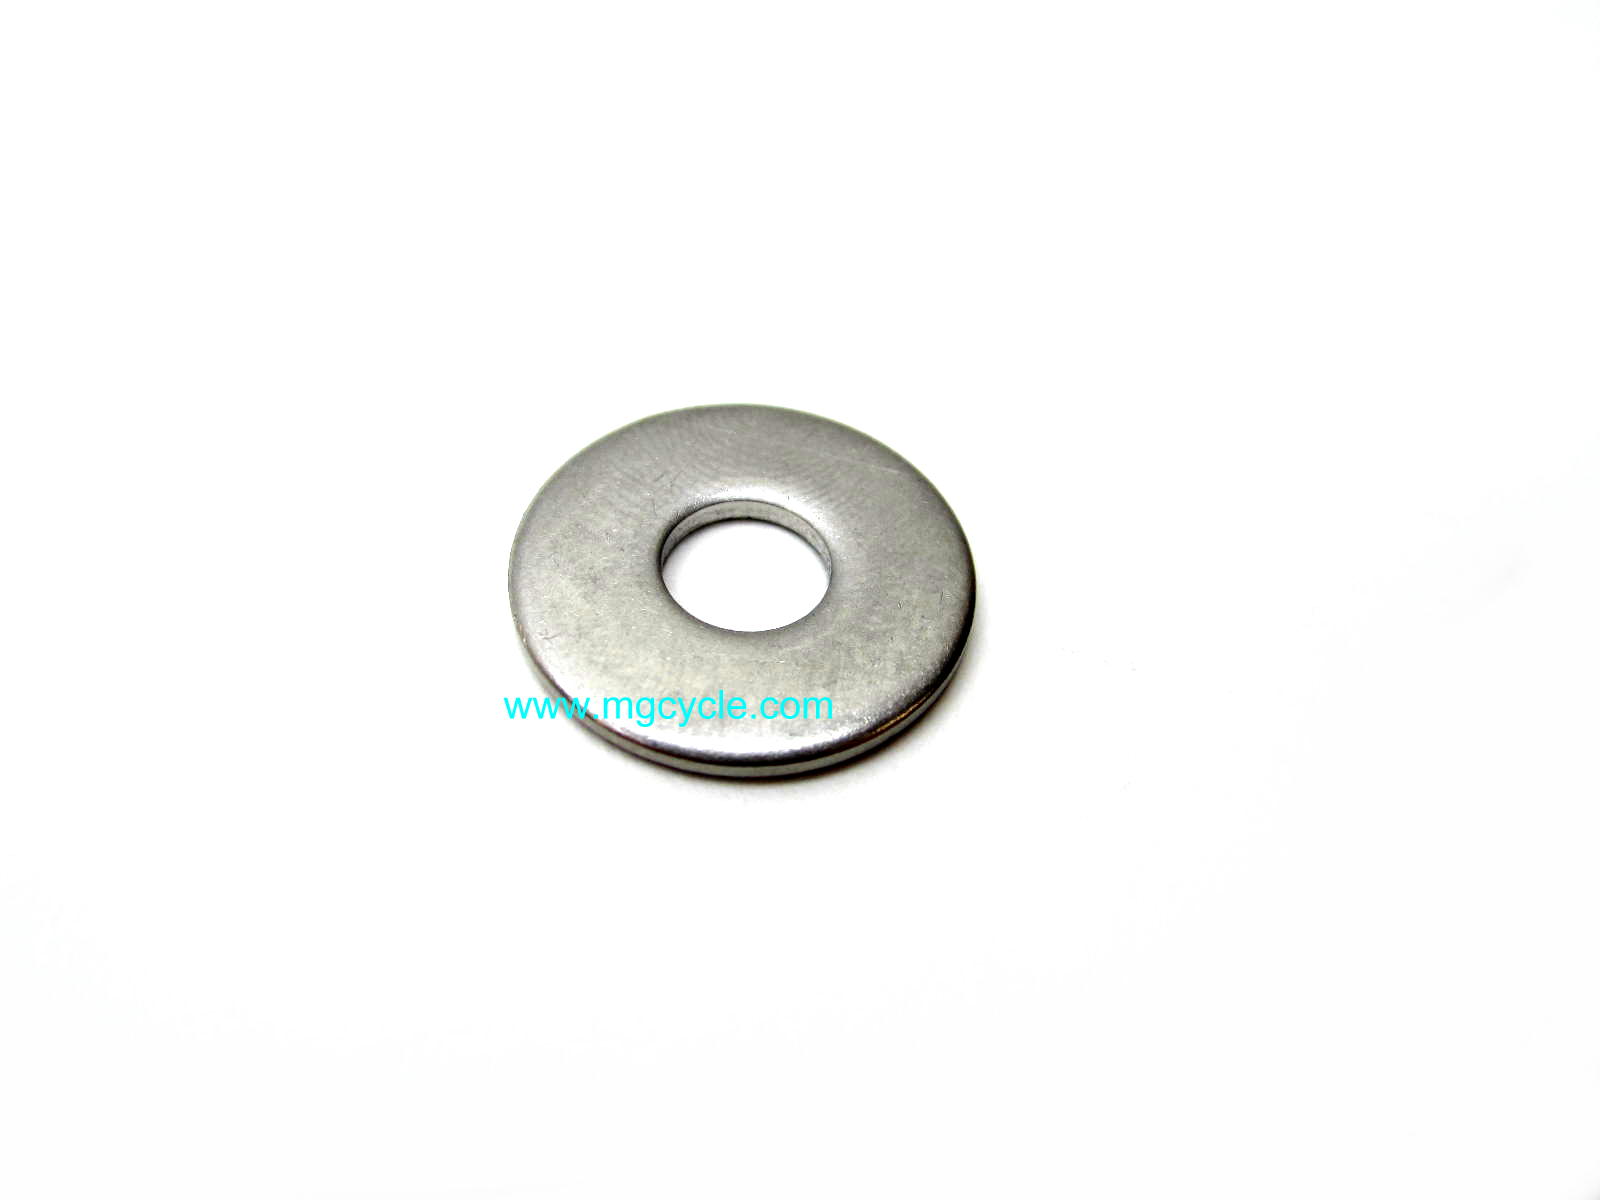 M8 fender washer, stainless for various rubber mounts GU95000255